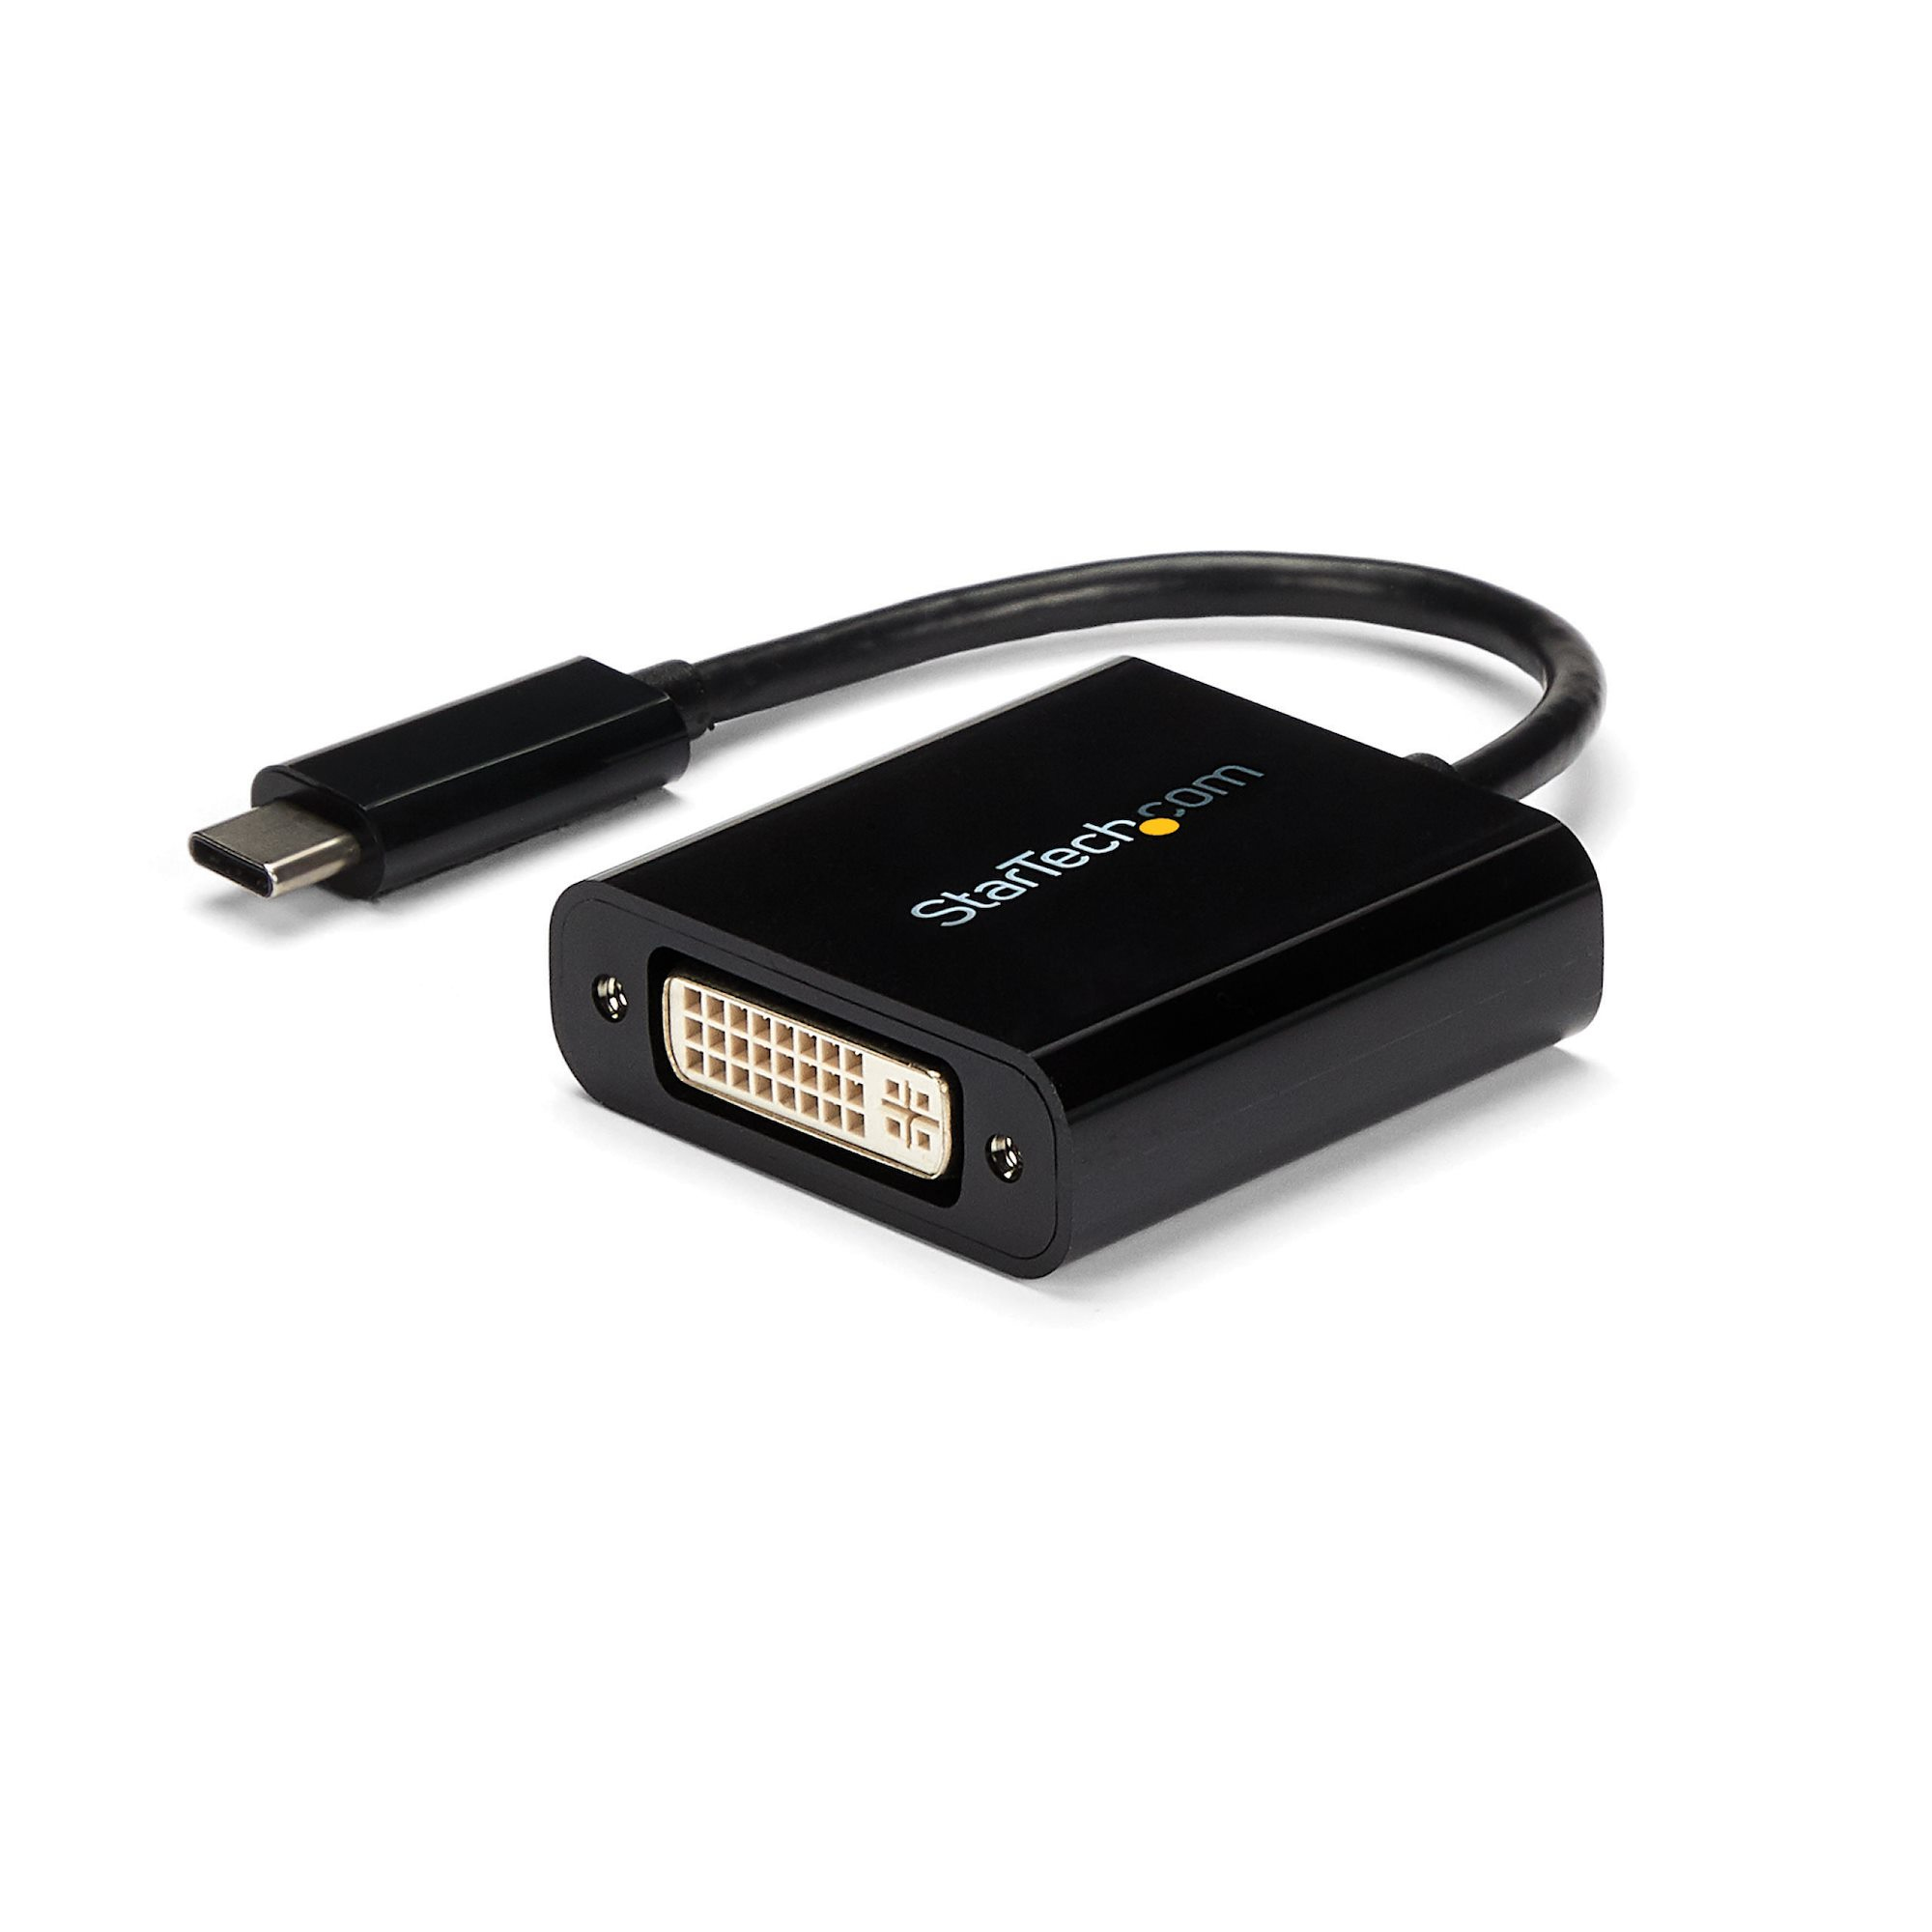 StarTech.com USB C to DVI Adapter - Black - 1920x1200 - USB Type C Video Converter for Your DVI D Display/Monitor/Projector - Upgraded Version is CDP2DVIEC